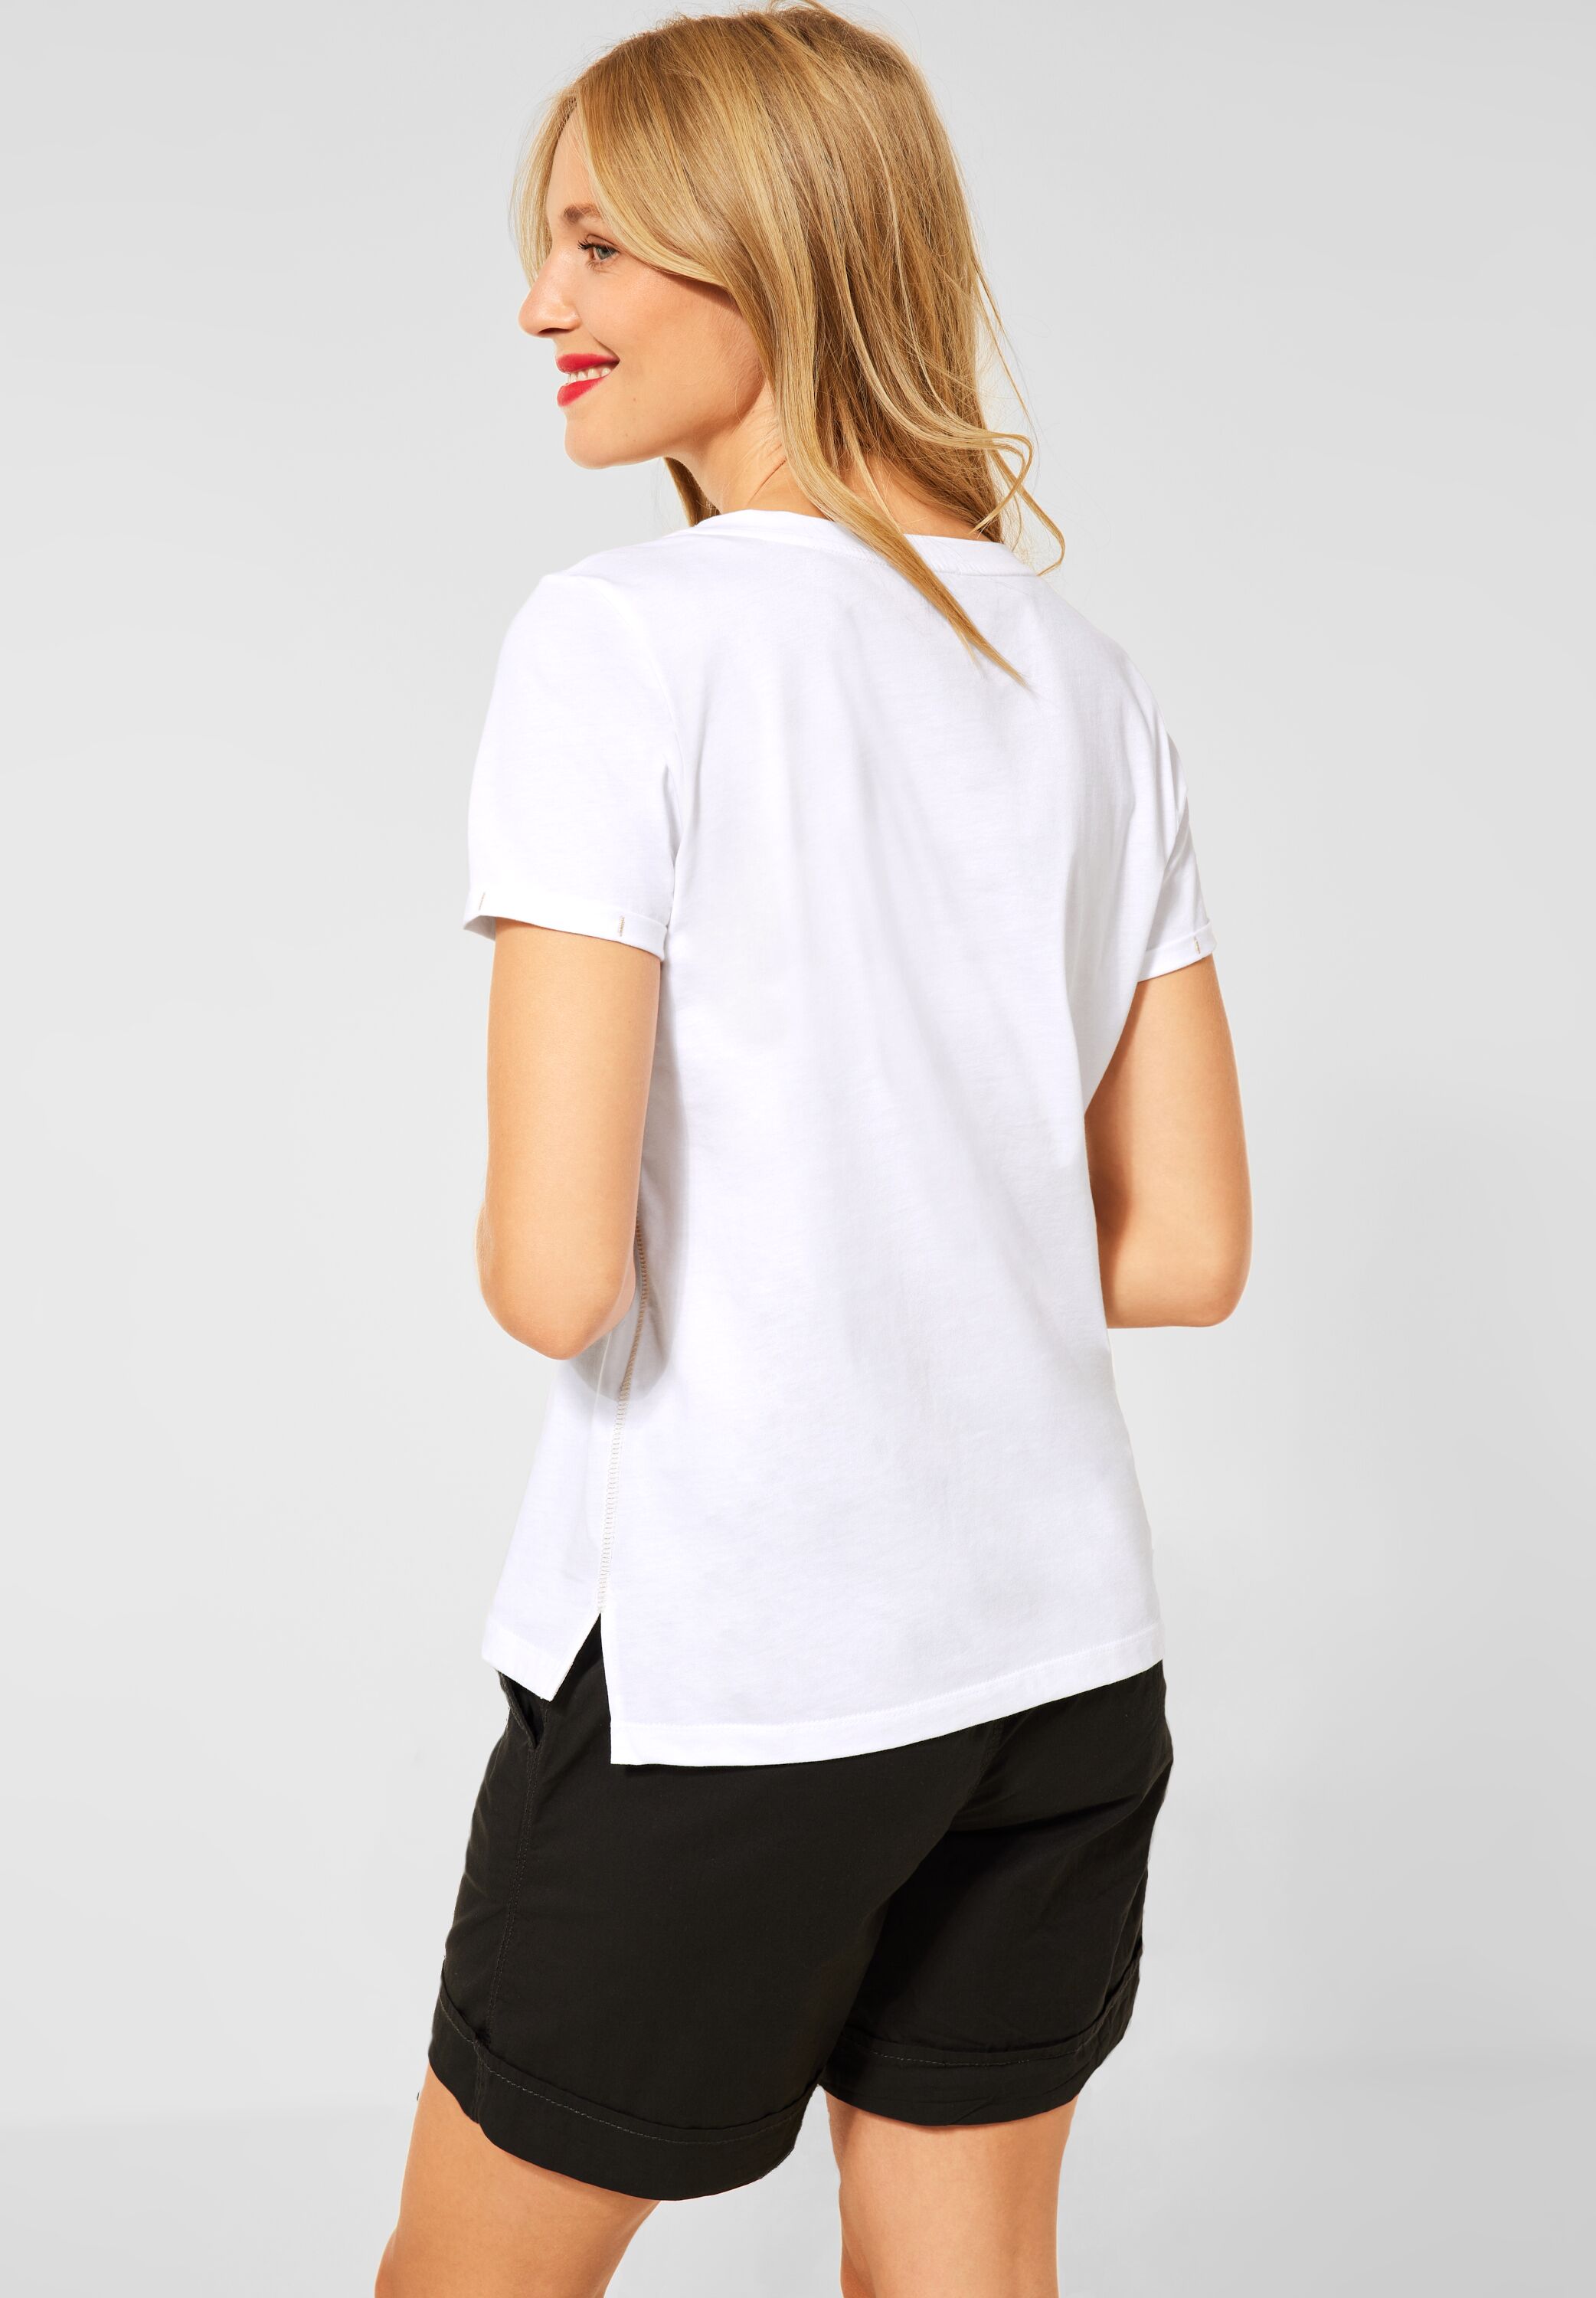 Street One - in White CONCEPT A316651-30000 Mode T-Shirt